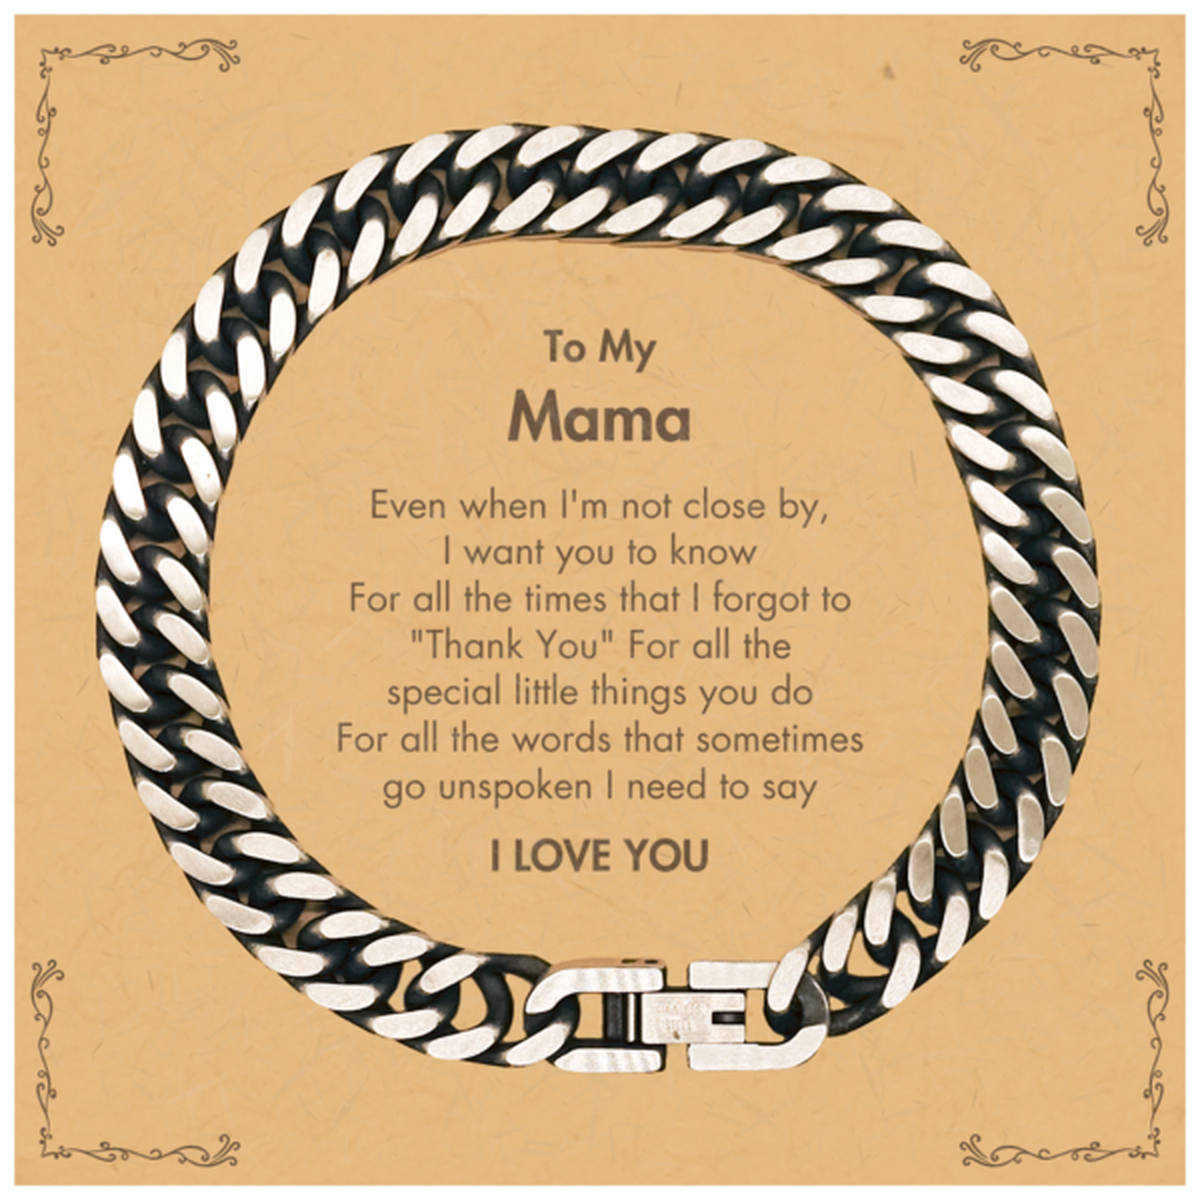 Thank You Gifts for Mama, Keepsake Cuban Link Chain Bracelet Gifts for Mama Birthday Mother's day Father's Day Mama For all the words That sometimes go unspoken I need to say I LOVE YOU